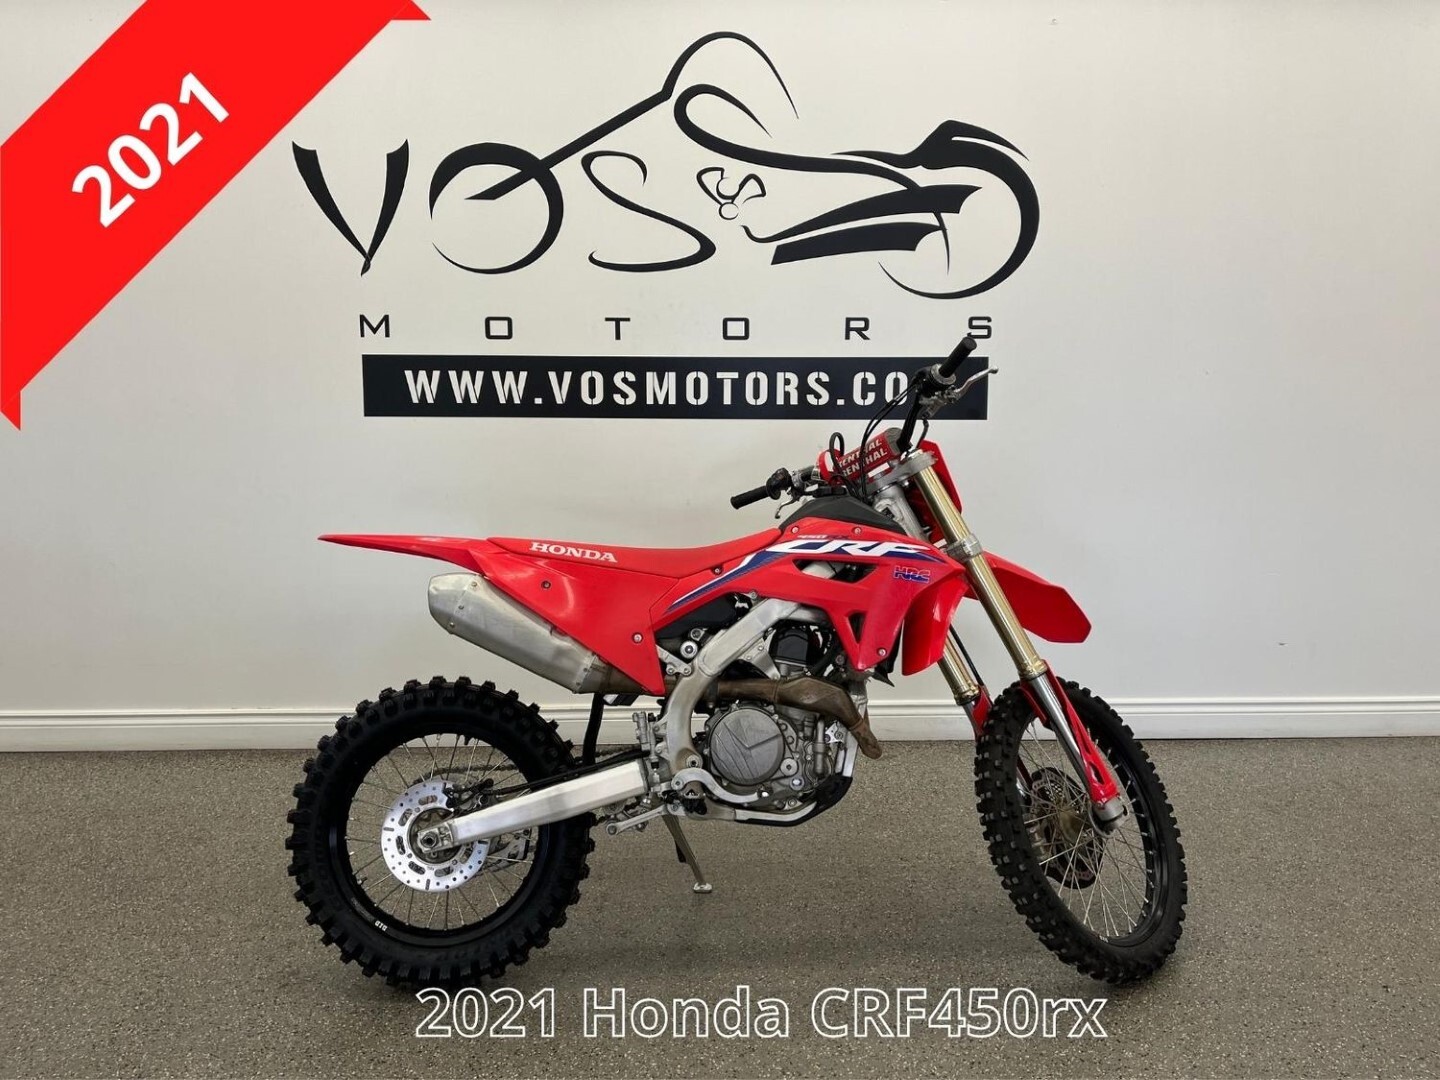 2021 Honda CRF450R CRF450R - V5002NP - -No Payments for 1 Year**